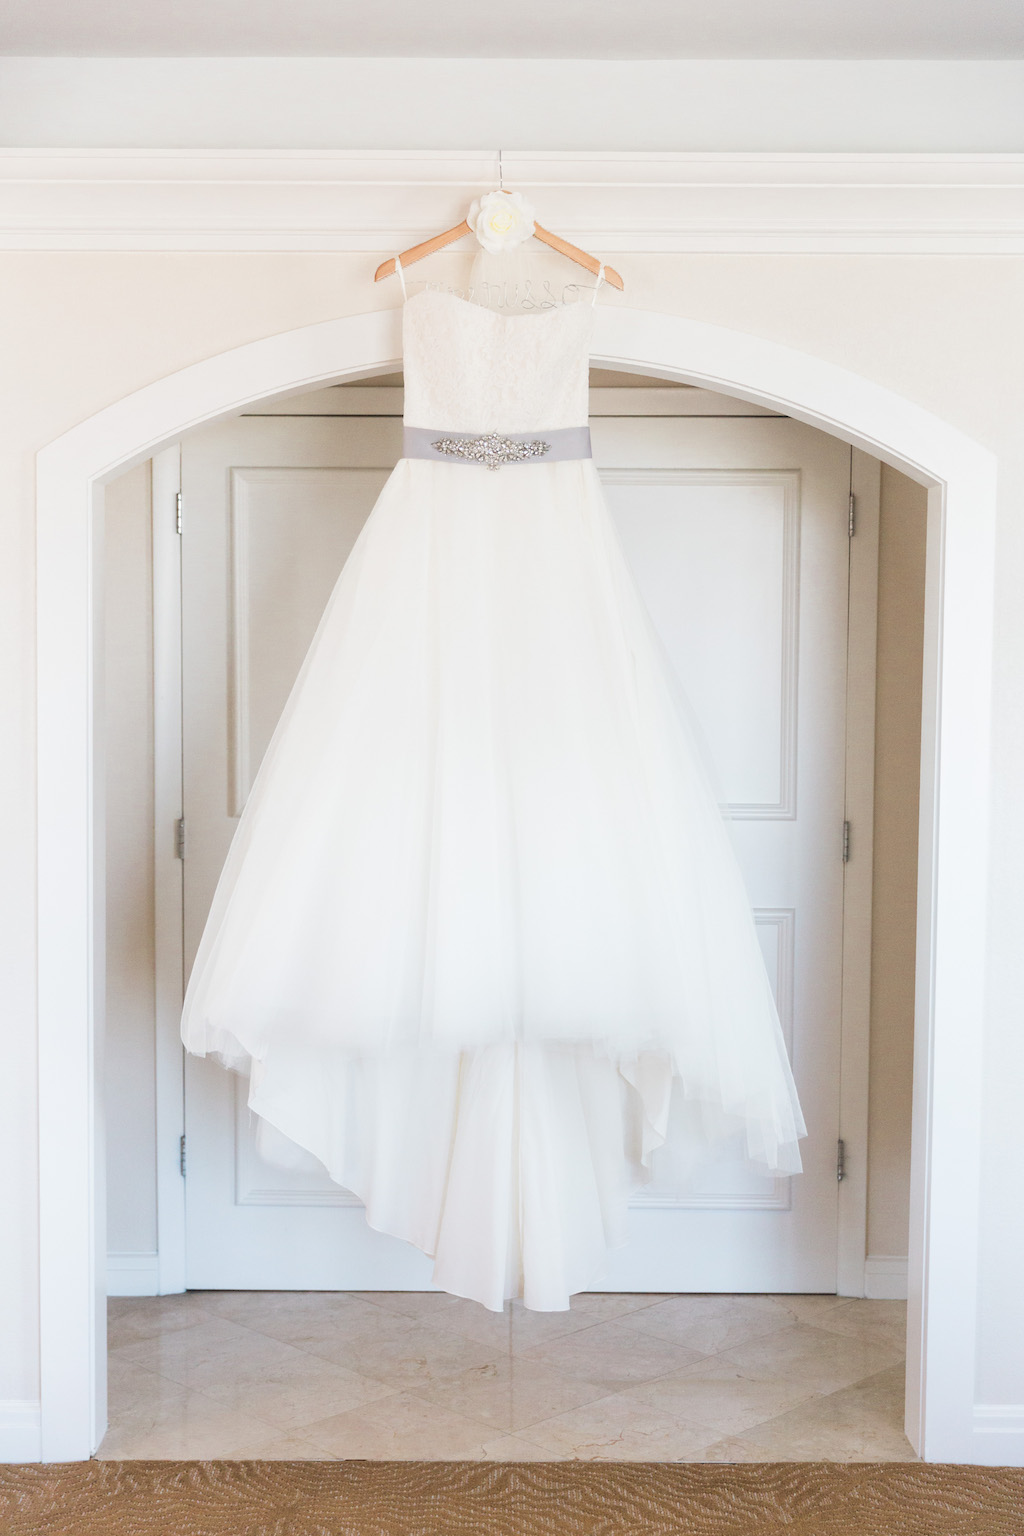 Strapless Scoop Neck Ballgown Wedding Dress with Grey Sash and Rhinestone Brooch on Wooden Hanger with White Rose Decor